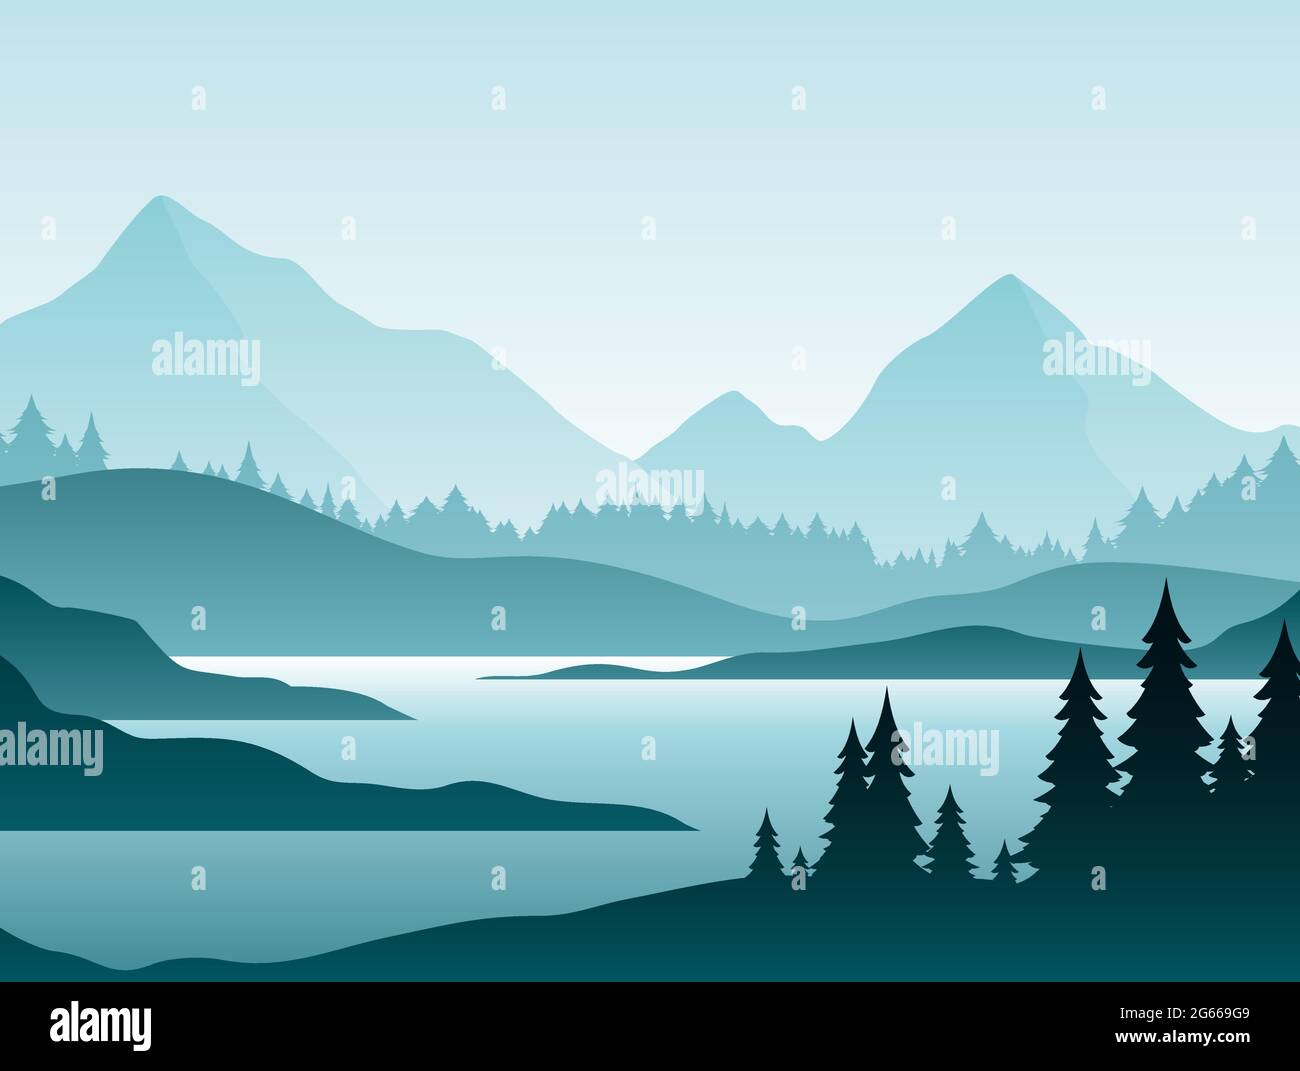 Forest foggy landscape flat vector illustration. Nature scenery with fir trees and hill peaks silhouettes on horizon. Mountain valley and river in Stock Vector